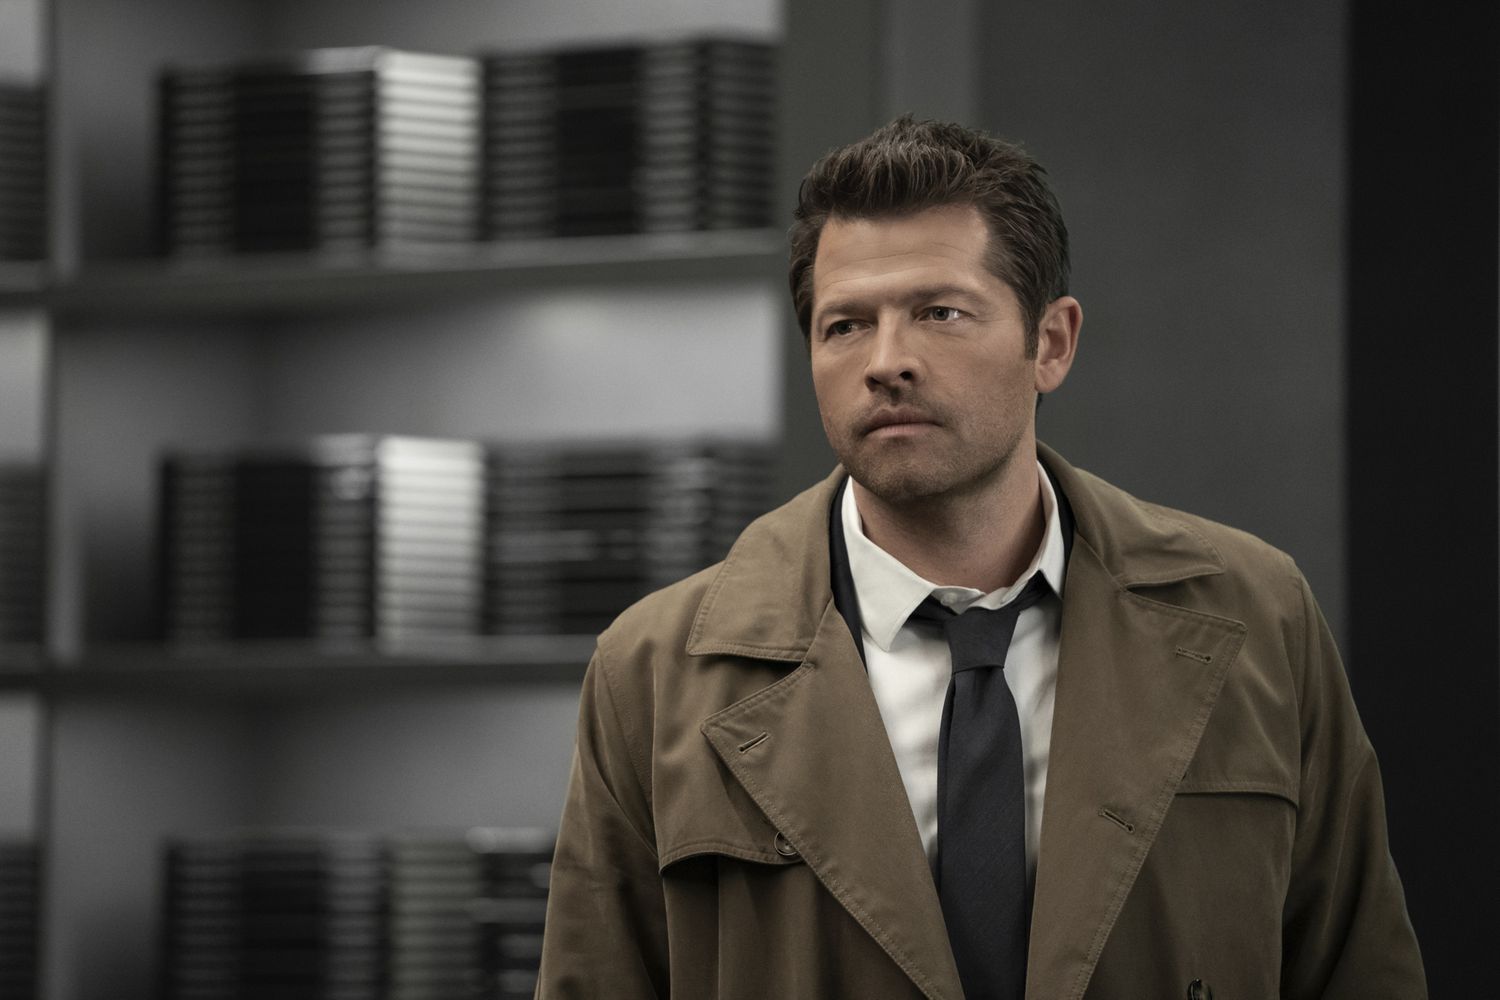 Castiel from Supernatural was only supposed to be on for a few episodes until he died. But his popularity was what saved his character.